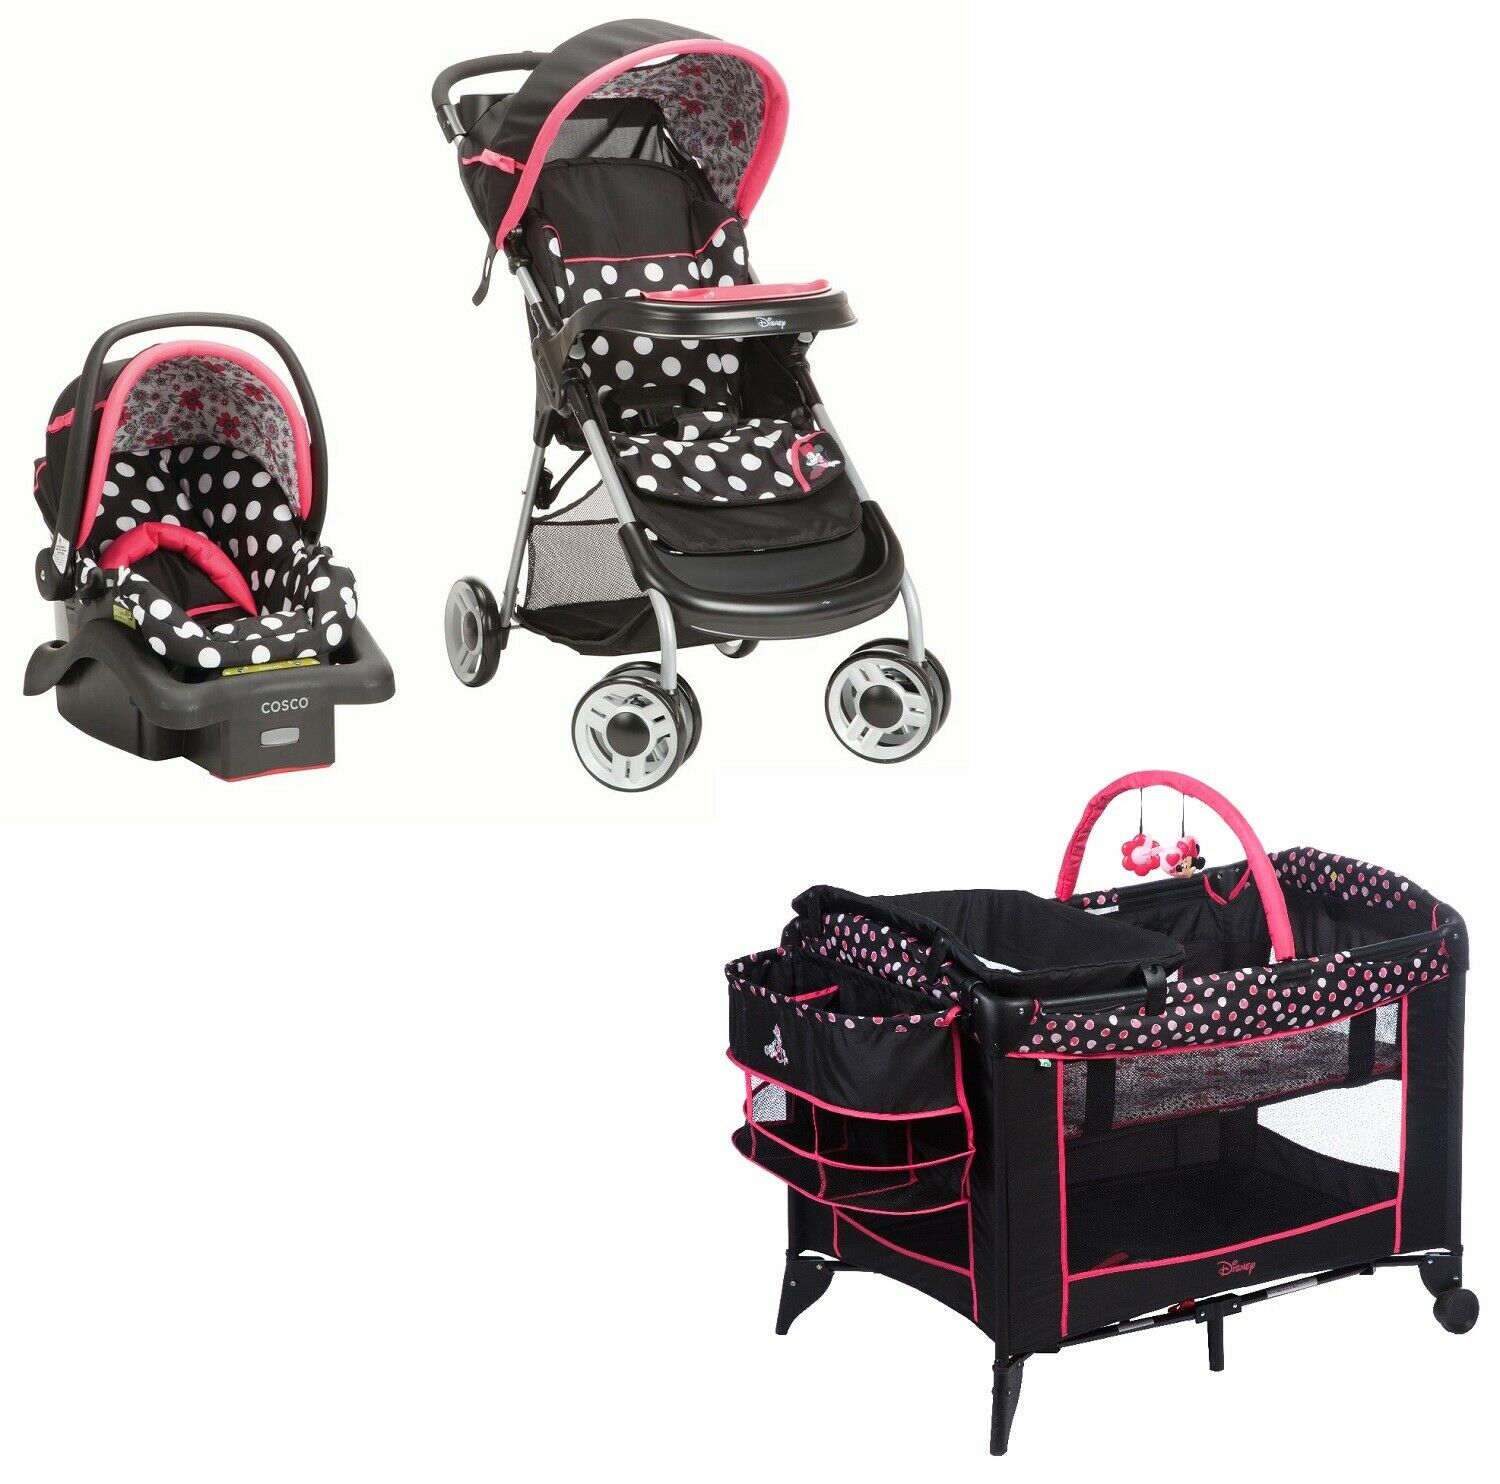 Disney Baby Minnie Mouse Stroller with Car Seat & Playard Infant Travel System